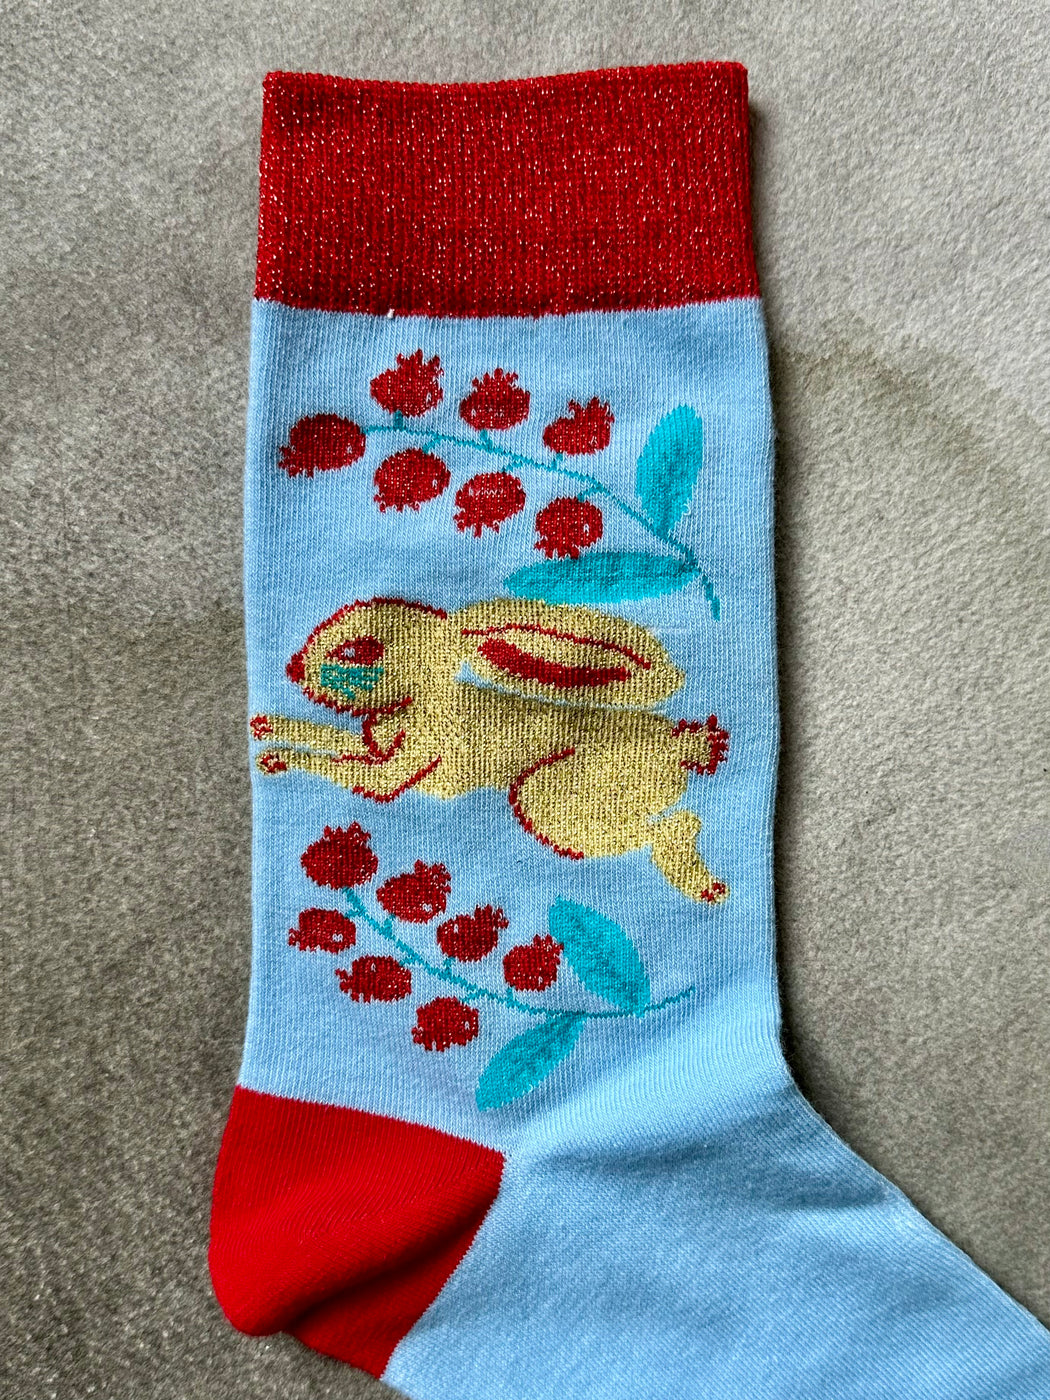 "Bunny"" Socks by Centinelle